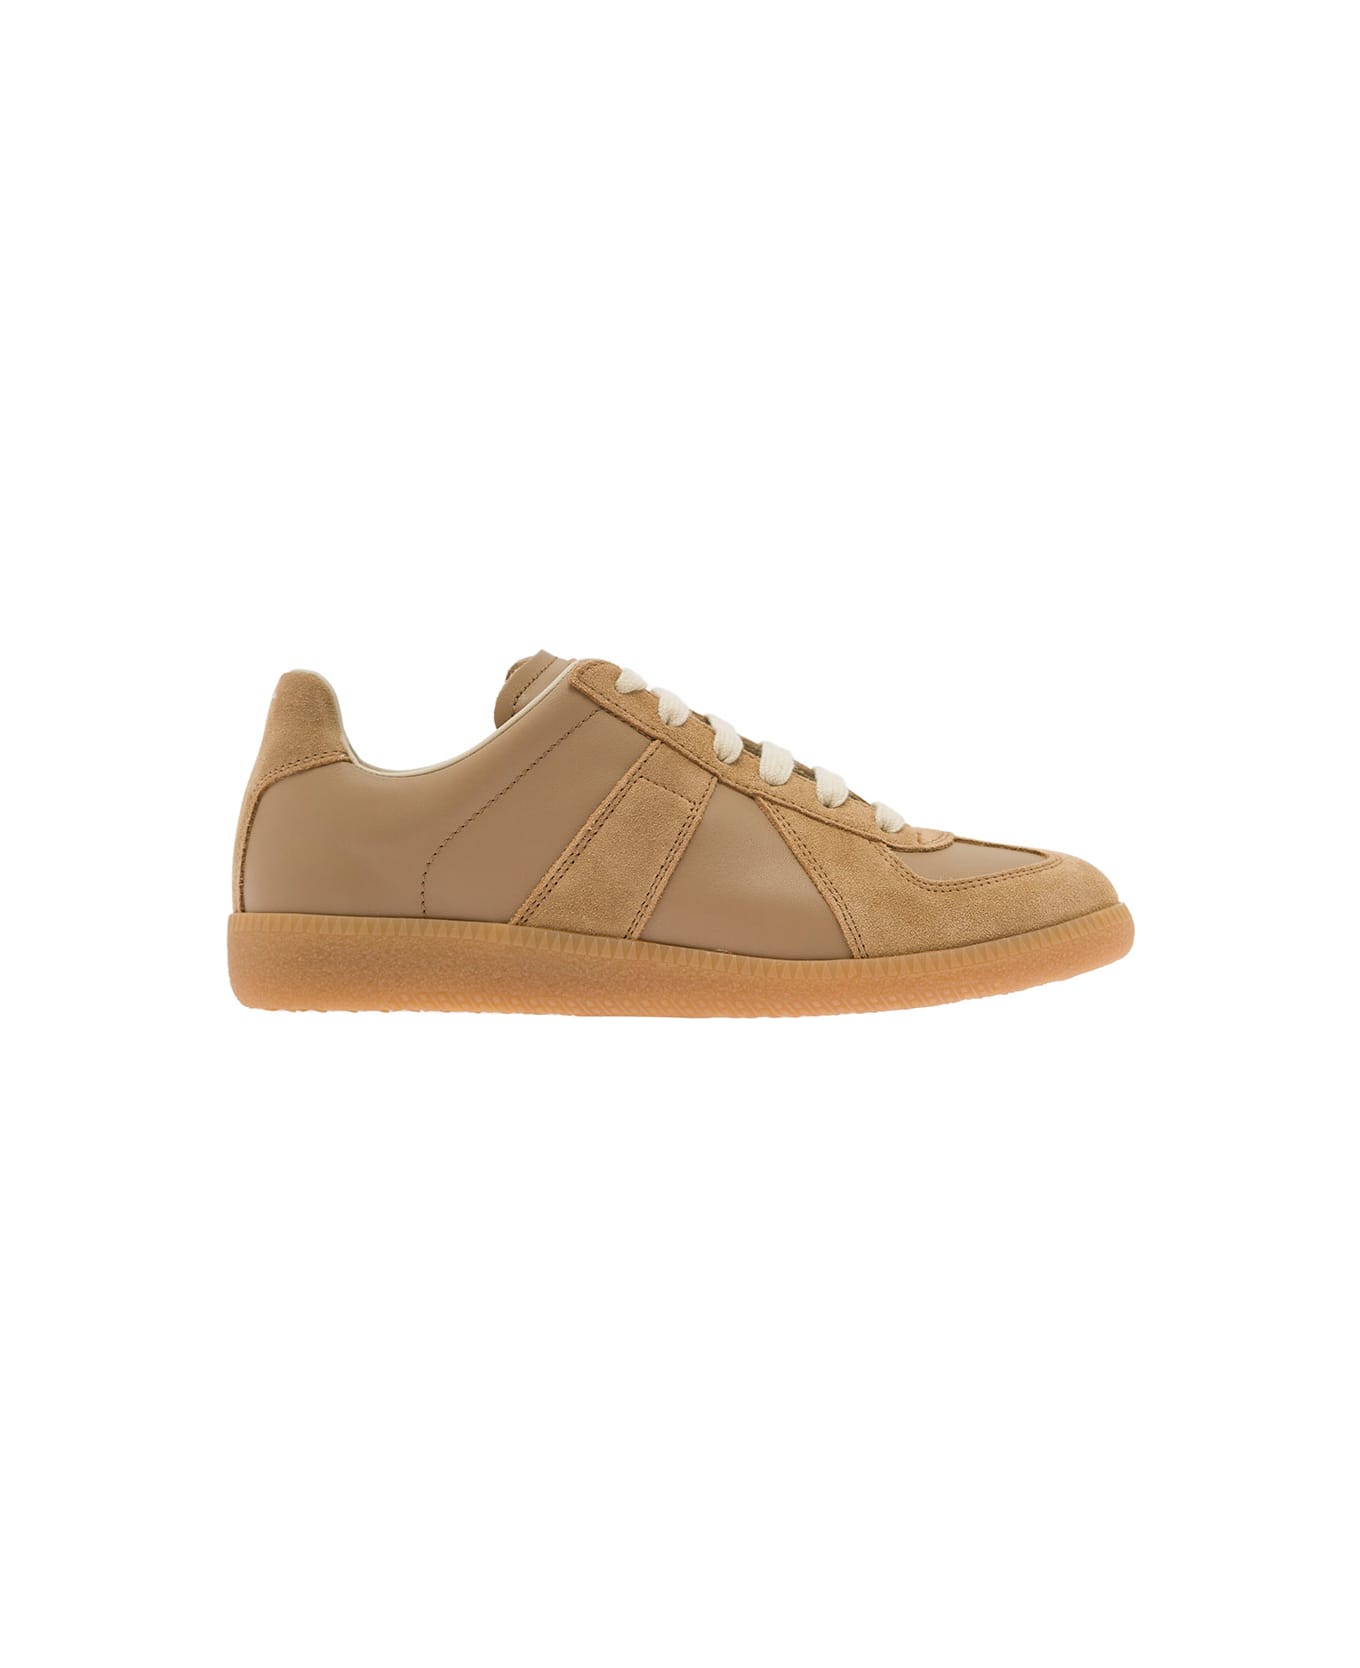 Maison Margiela 'replica' Beige And Brown Low-top Sneakers With Suede Inserts In Leather Woman - Beige